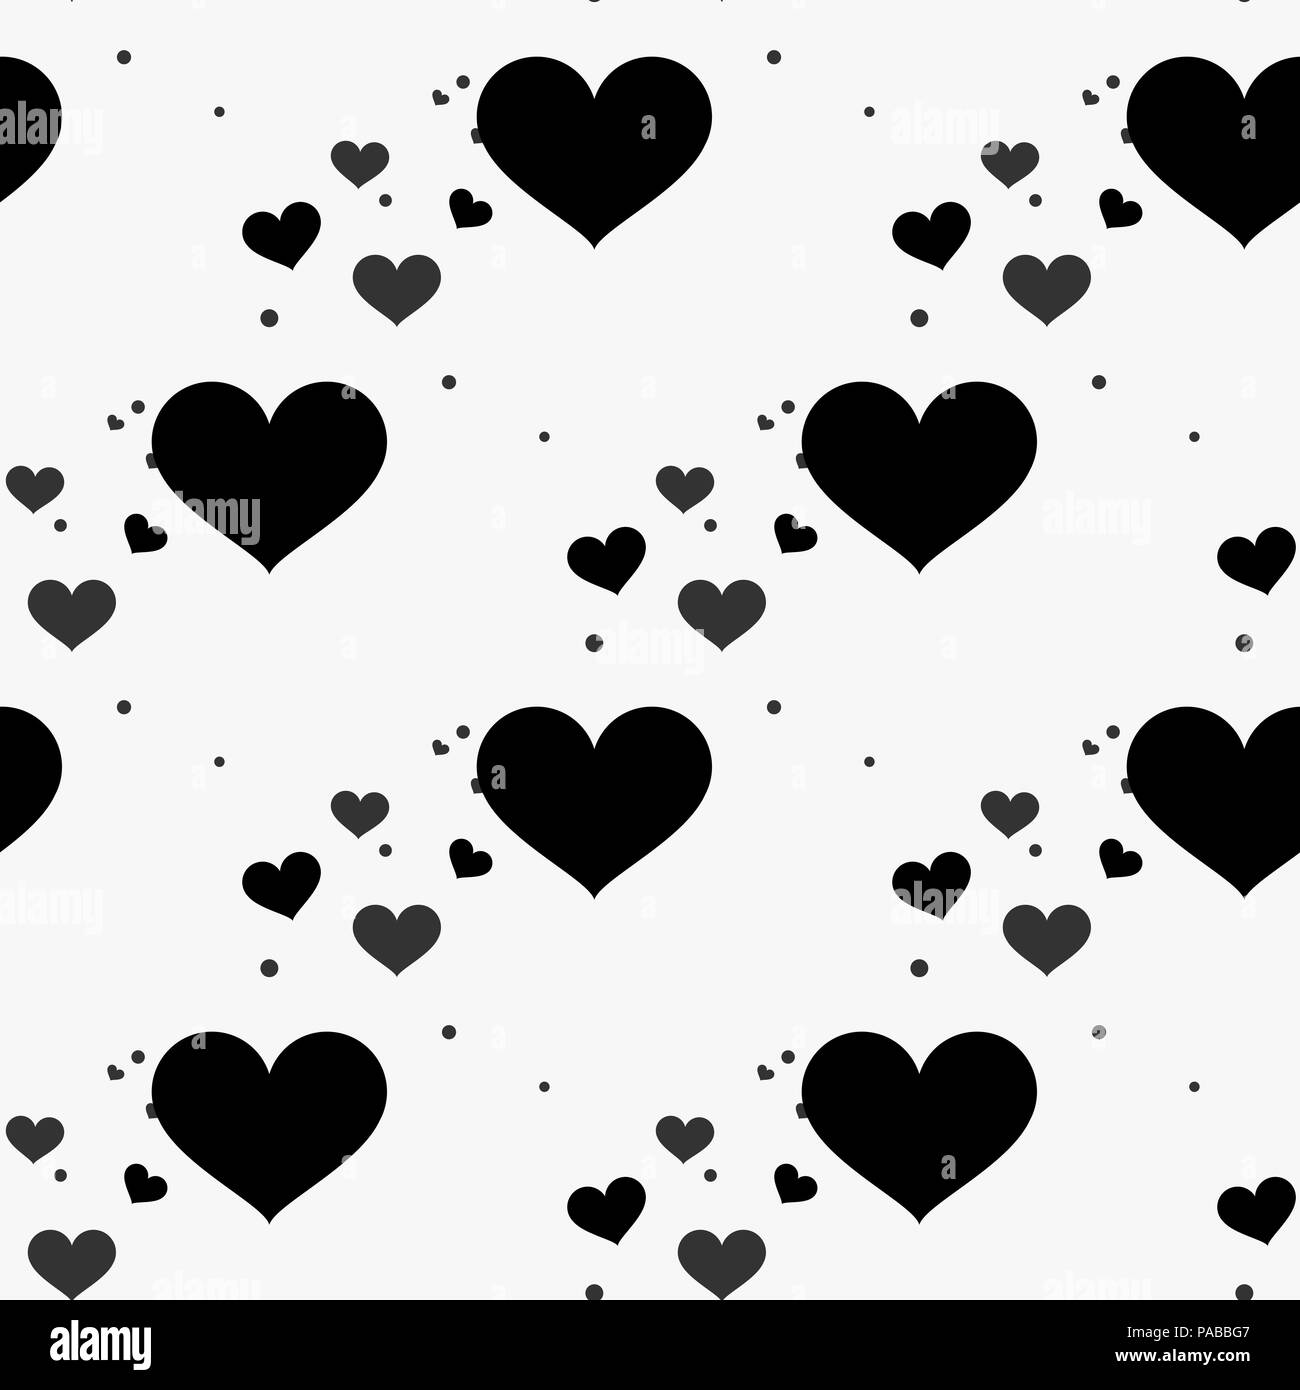 Modern kids b w seamless pattern with heart. Hand drawn graphic black and white cute minimalistic scandinavian cartoon elements on white background ep Stock Vector